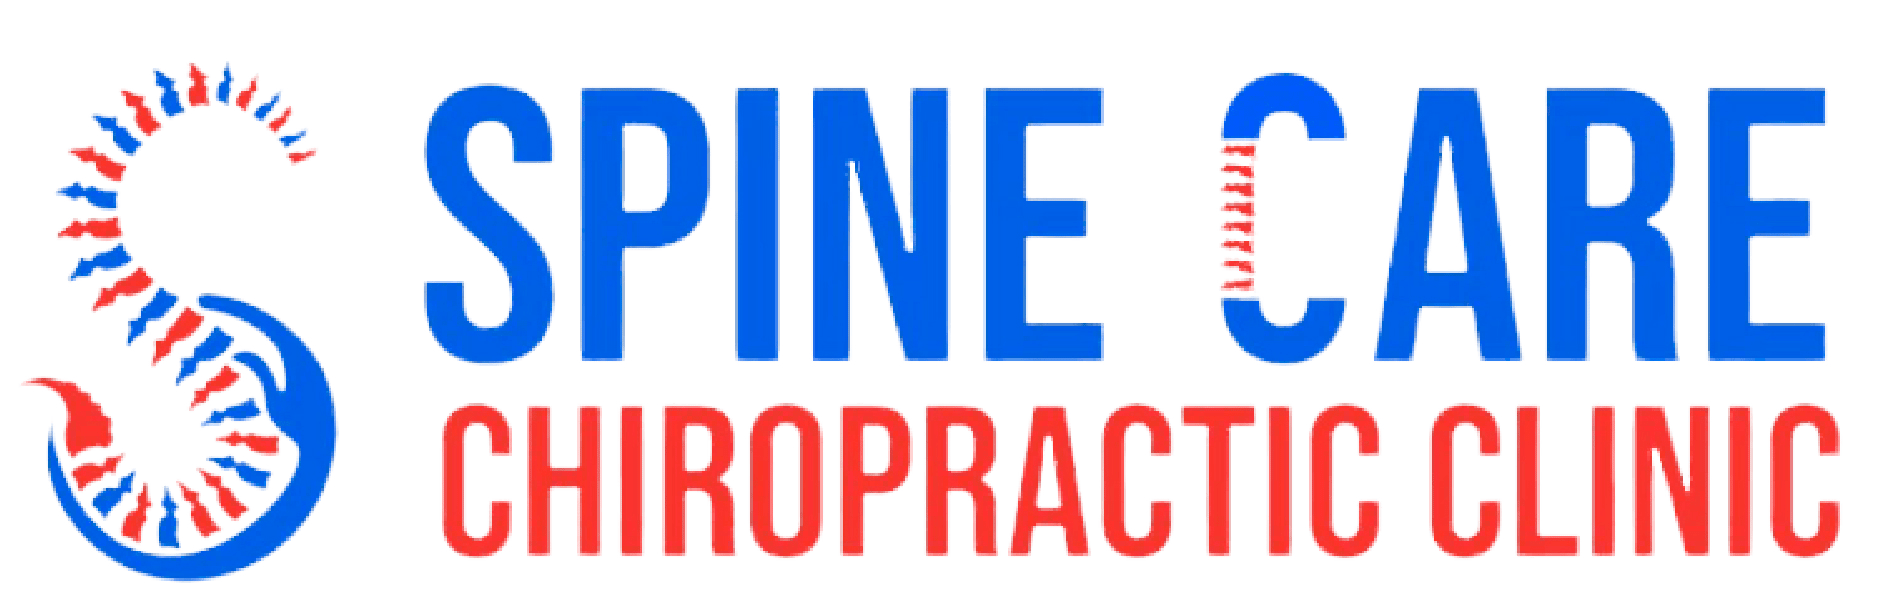 Spine Care Chiropractic Clinic